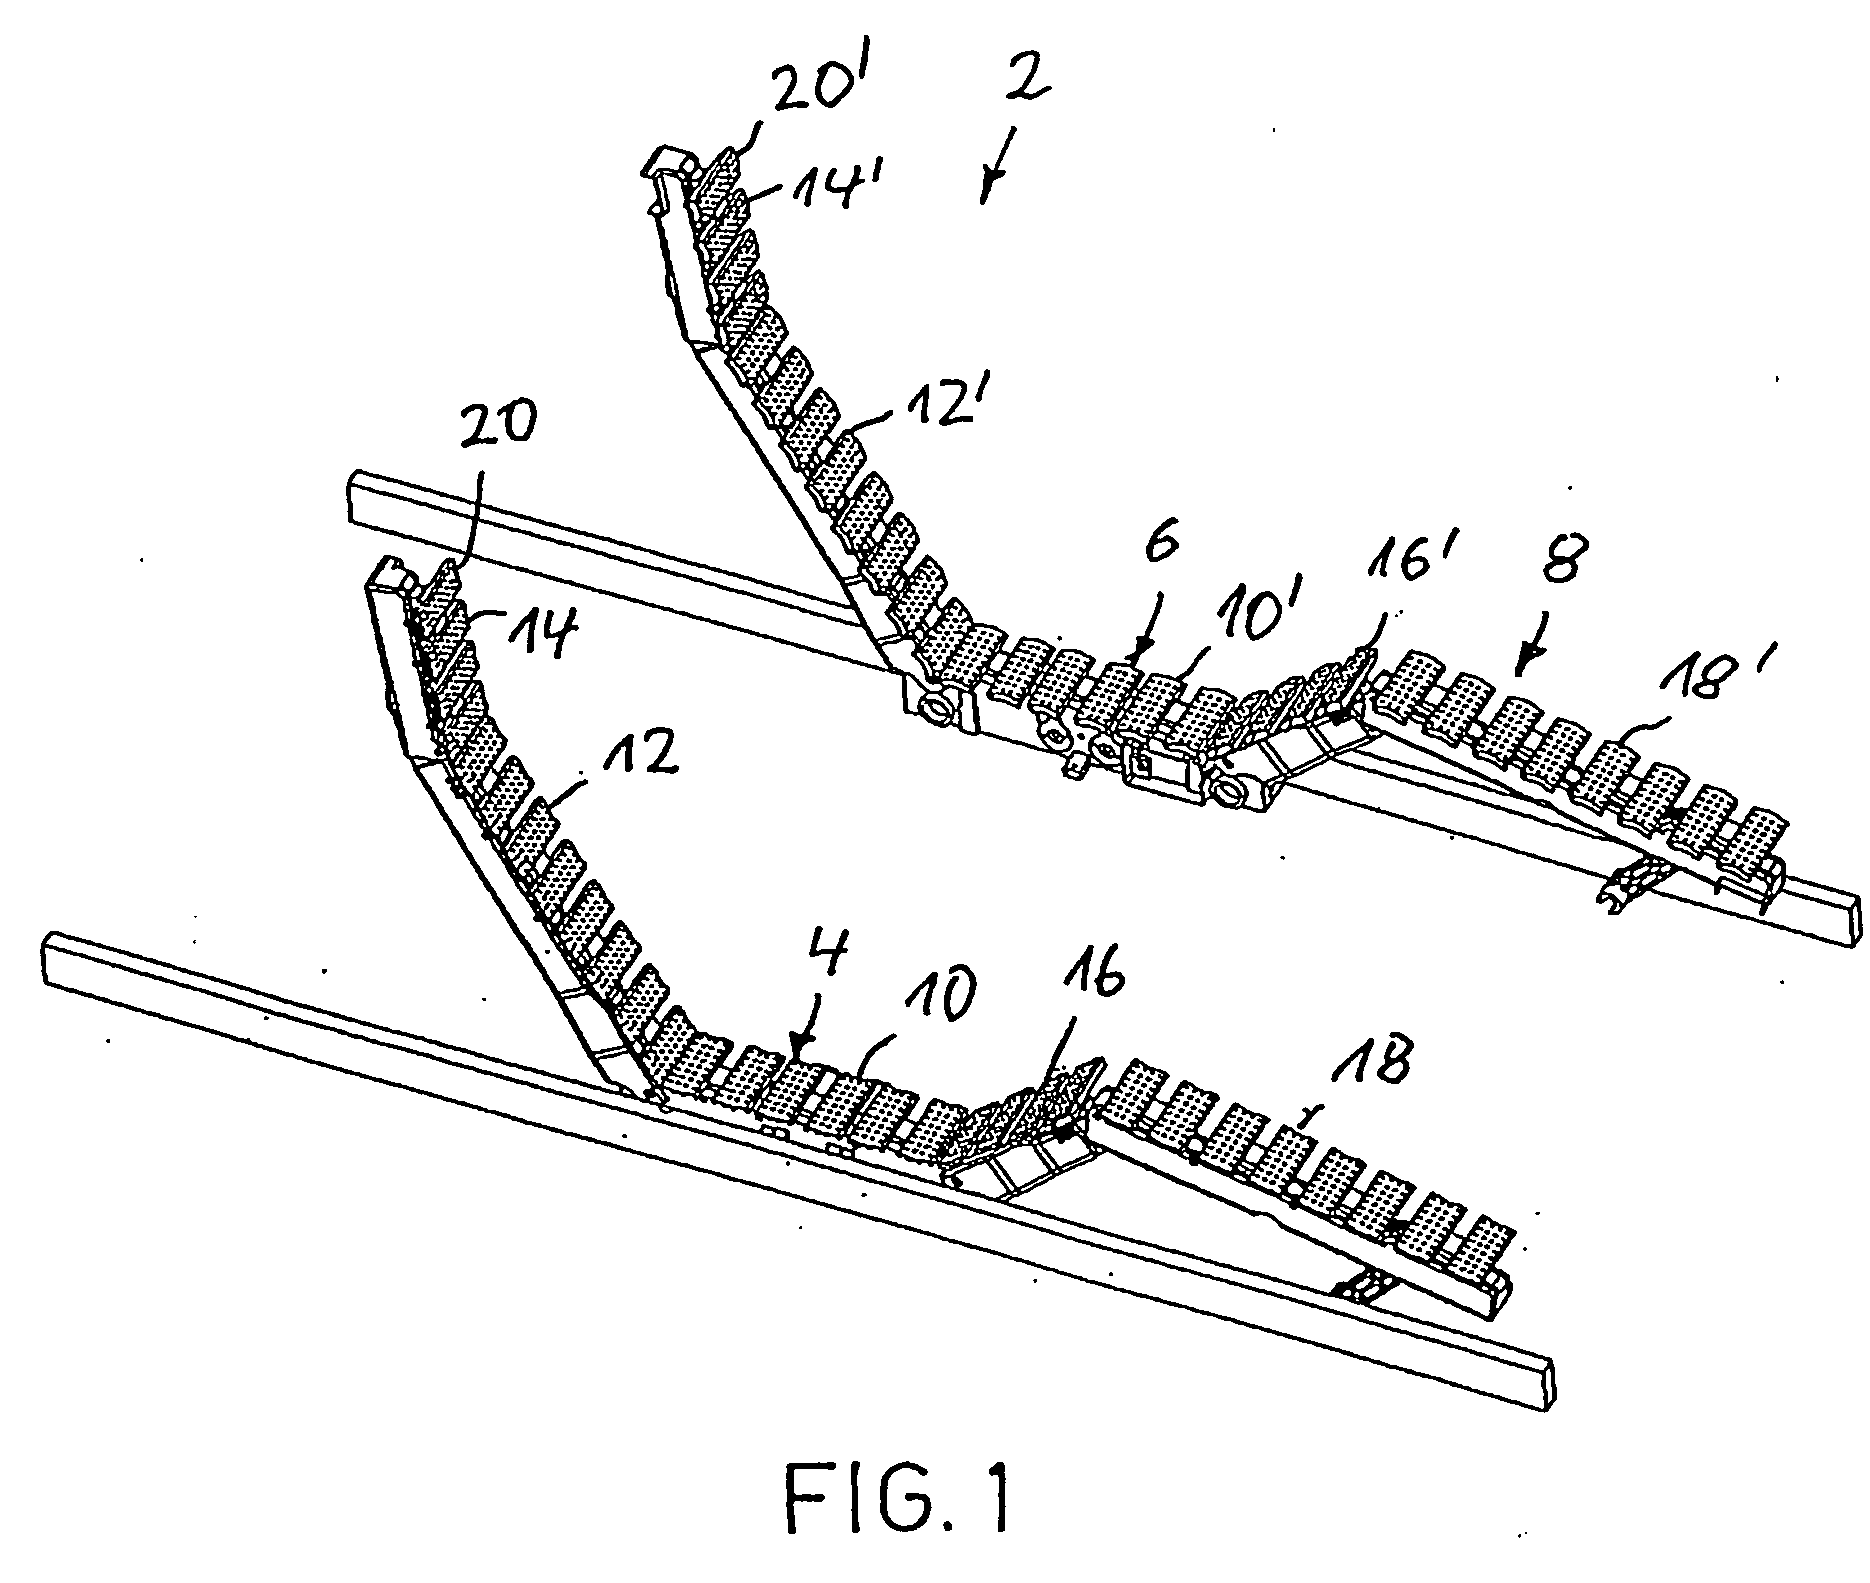 Modular system for assembling electromechanically adjustable supporting devices for upholstery of furniture for sitting or reclining